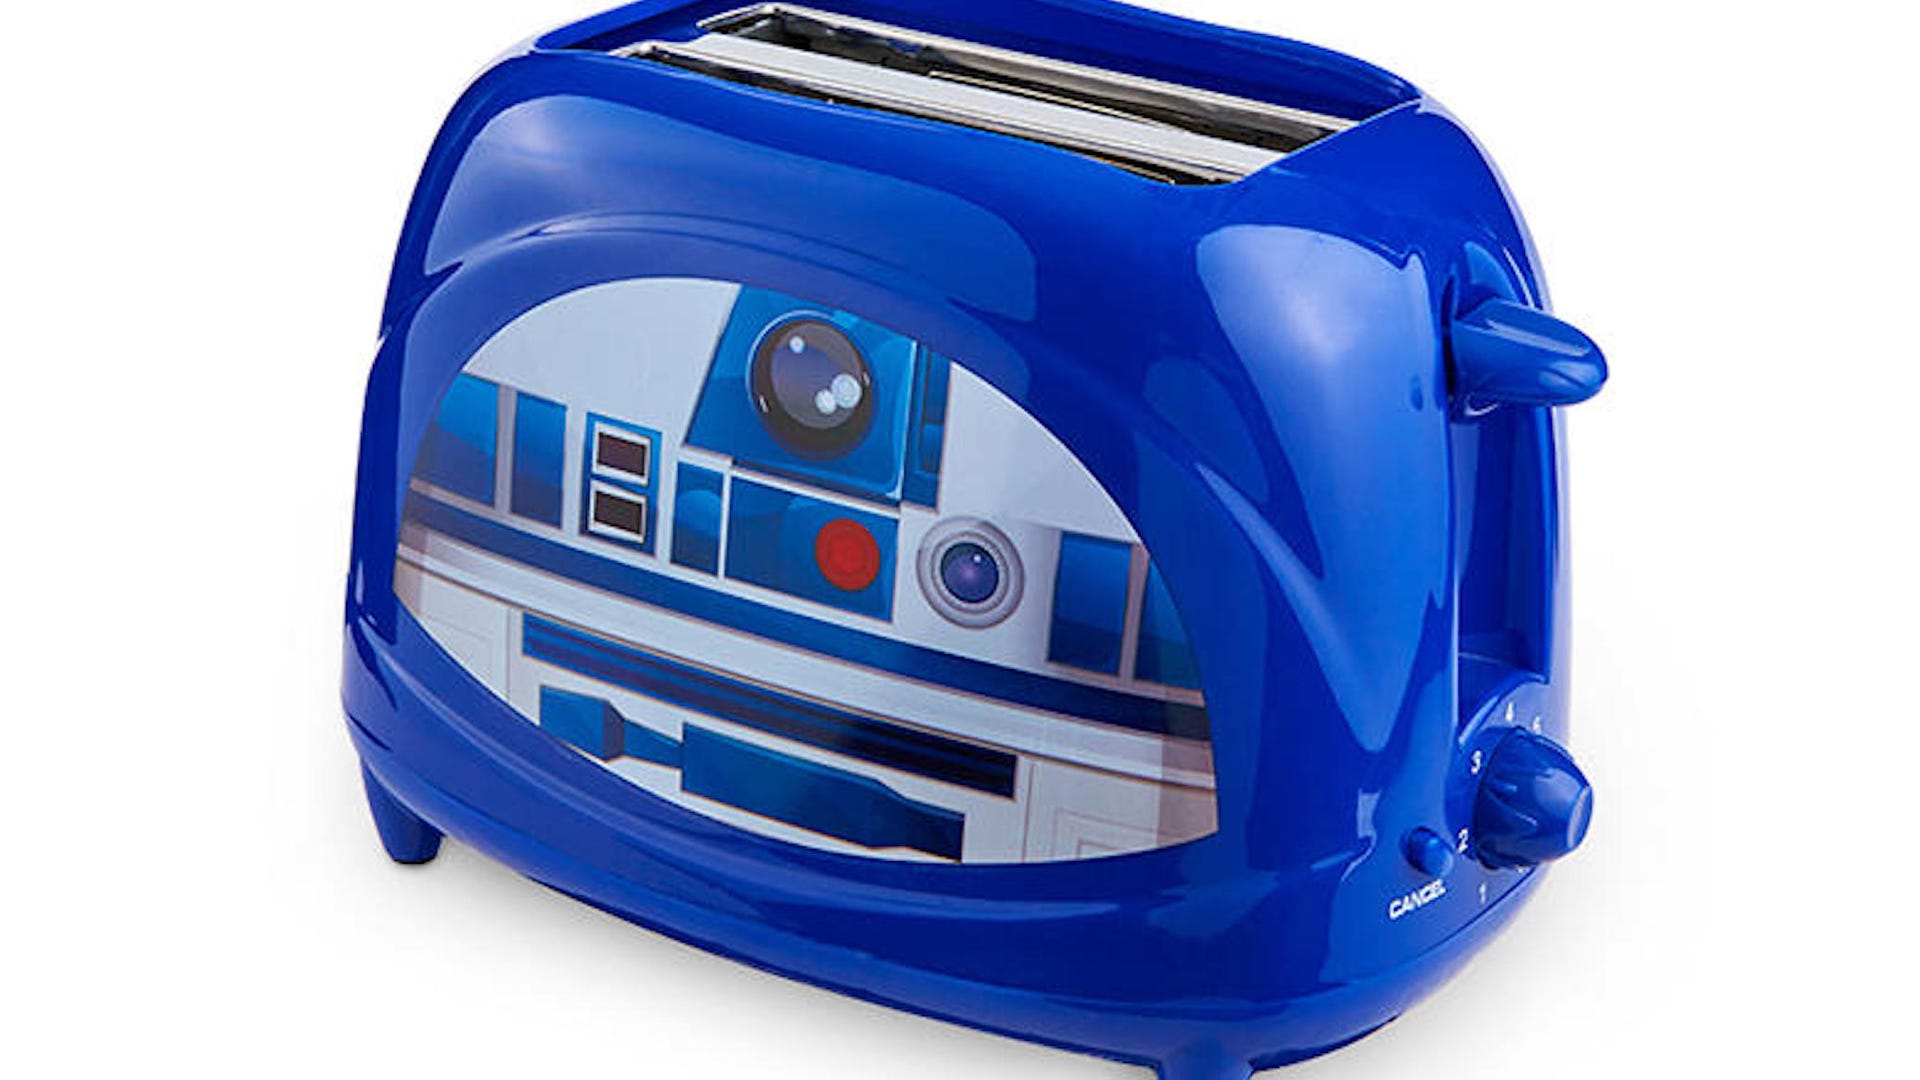 R2-D2 toaster